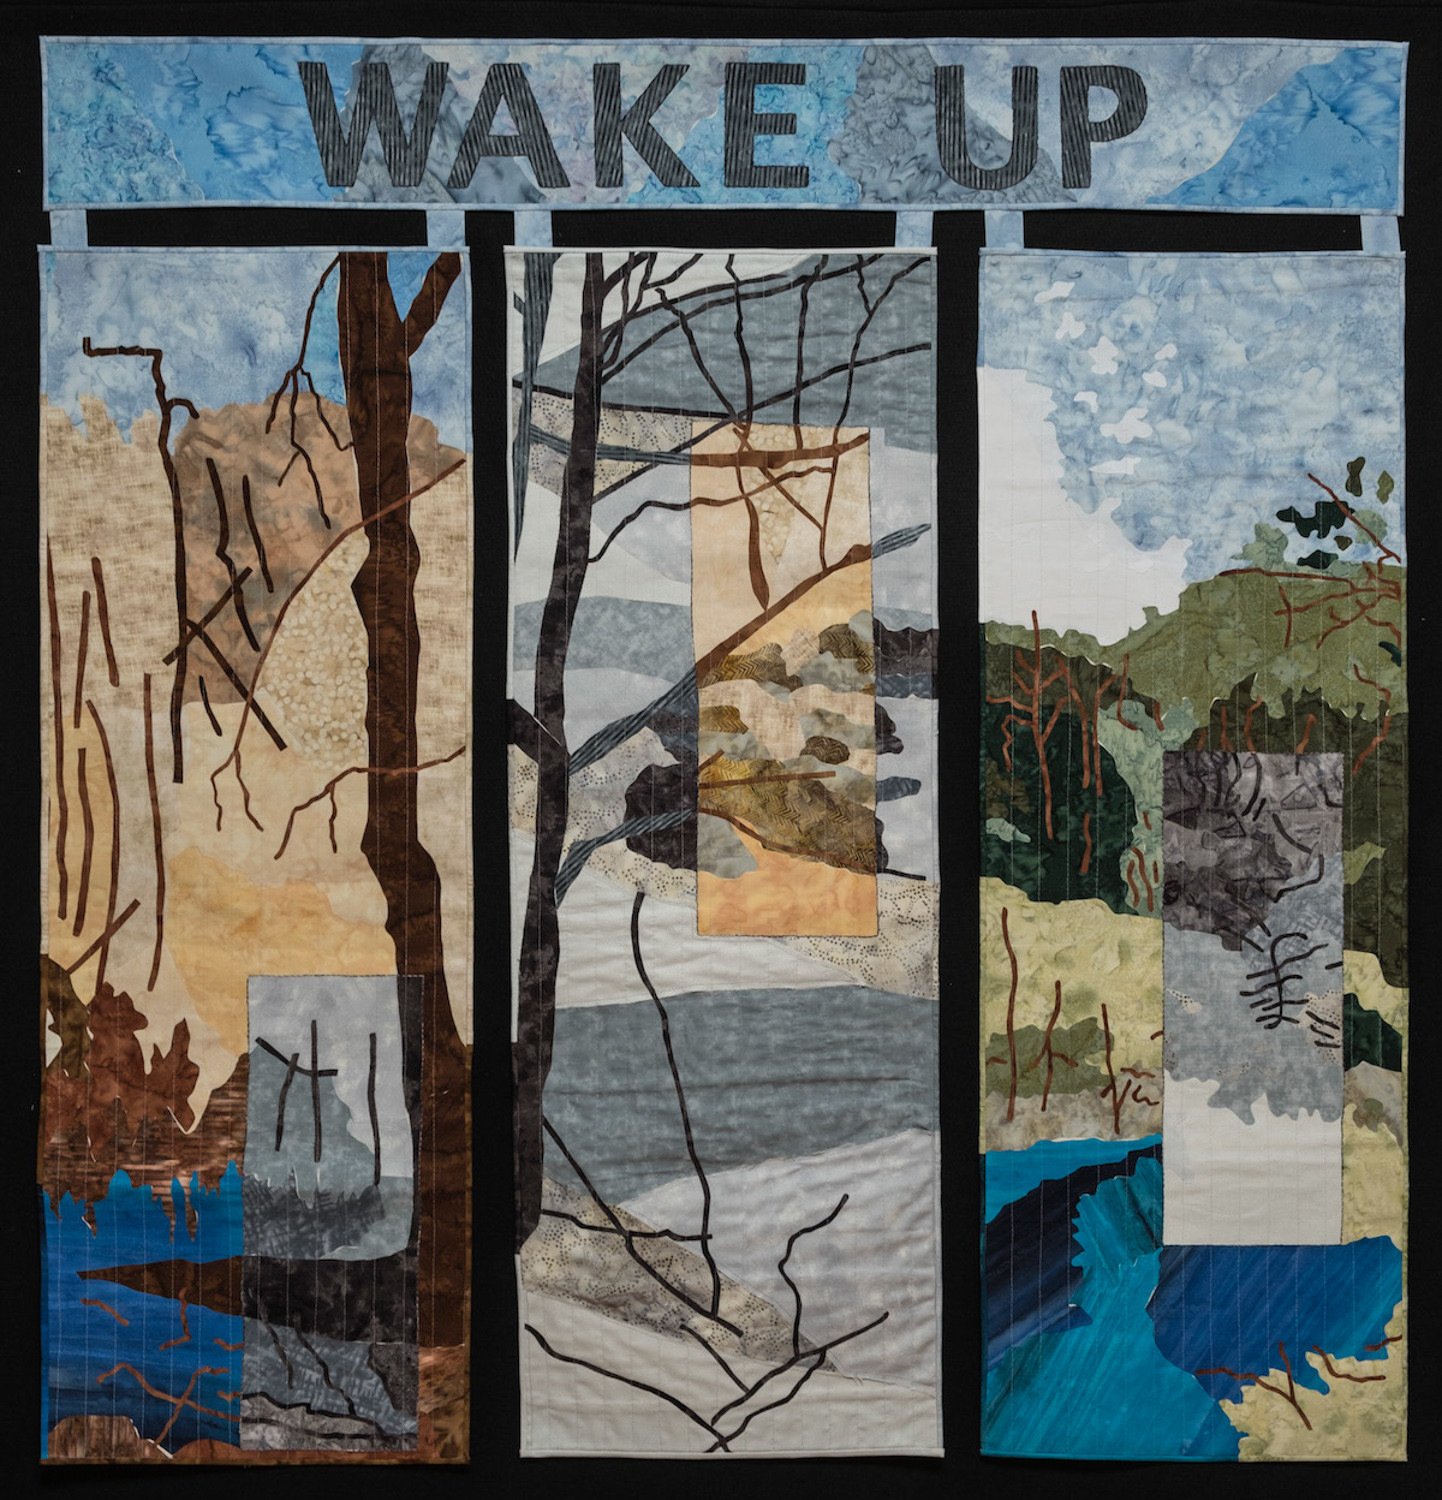 Rachel Kanter focuses on the green side of things in “Wake Up,’ where she encourages the Jewish community to open its eyes on the current state of Earth and the environment.